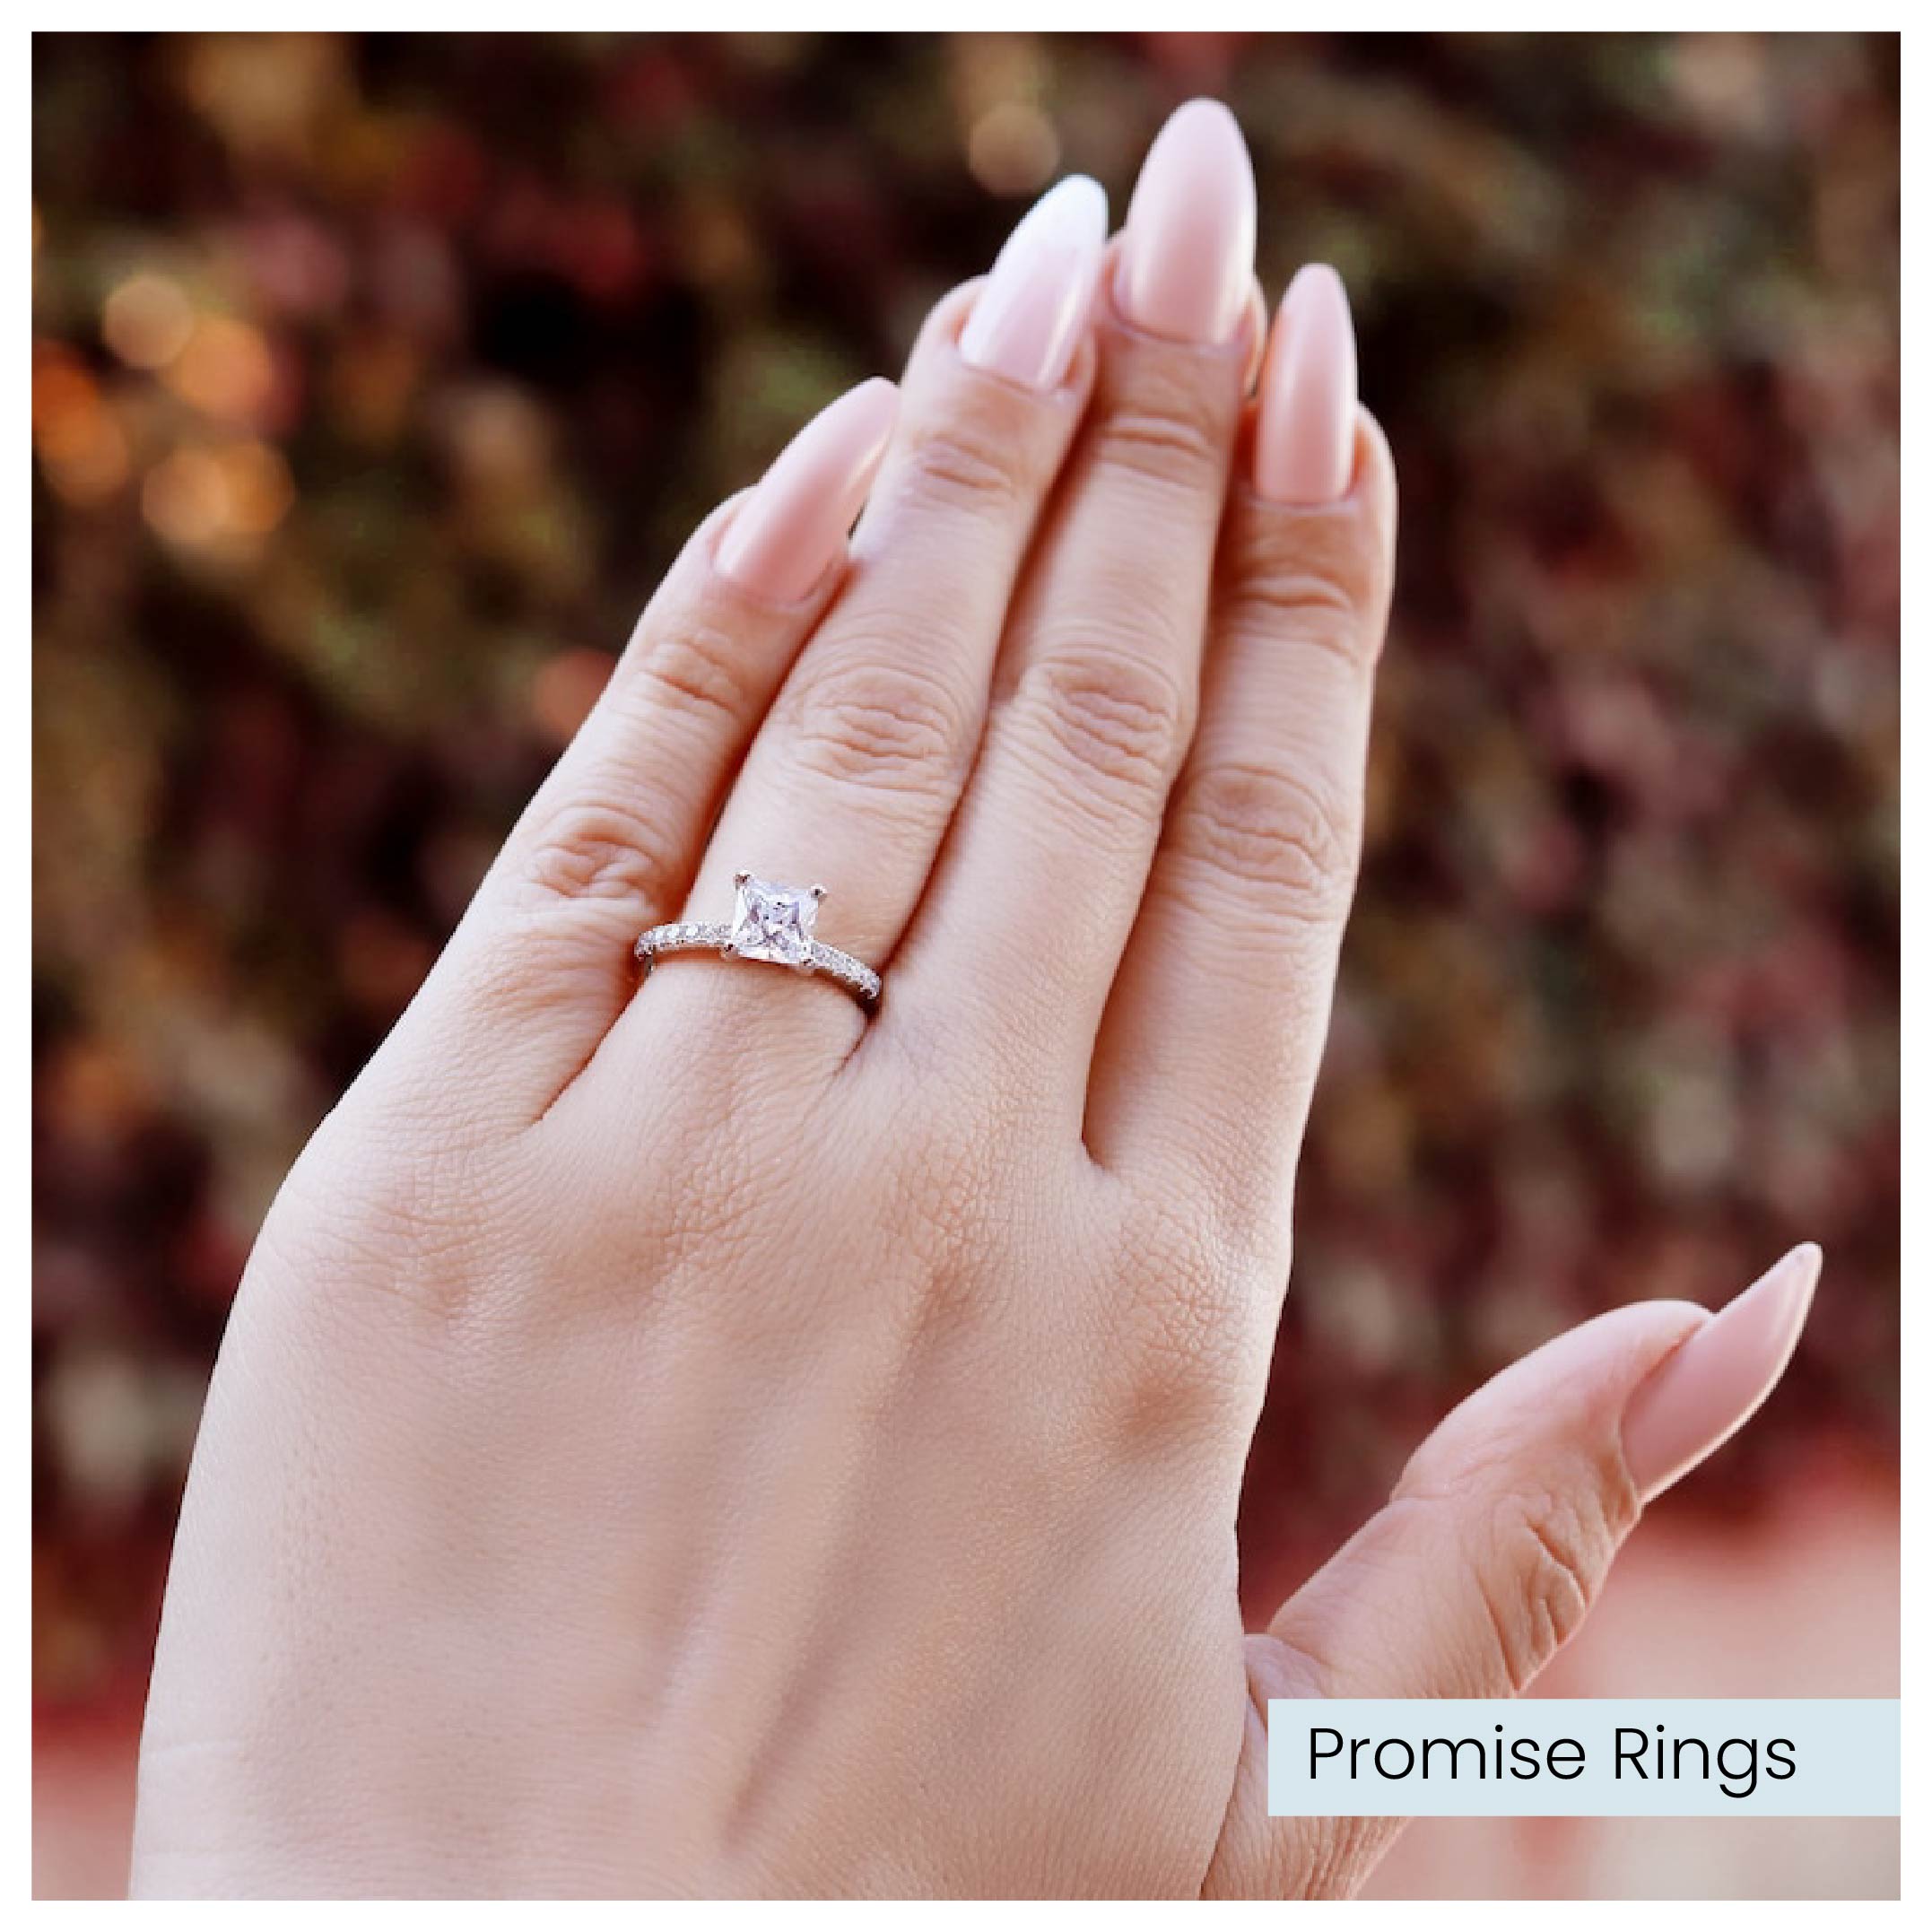 The Ultimate Guide To Types Of Ring Prongs - LaneWoods Jewelry